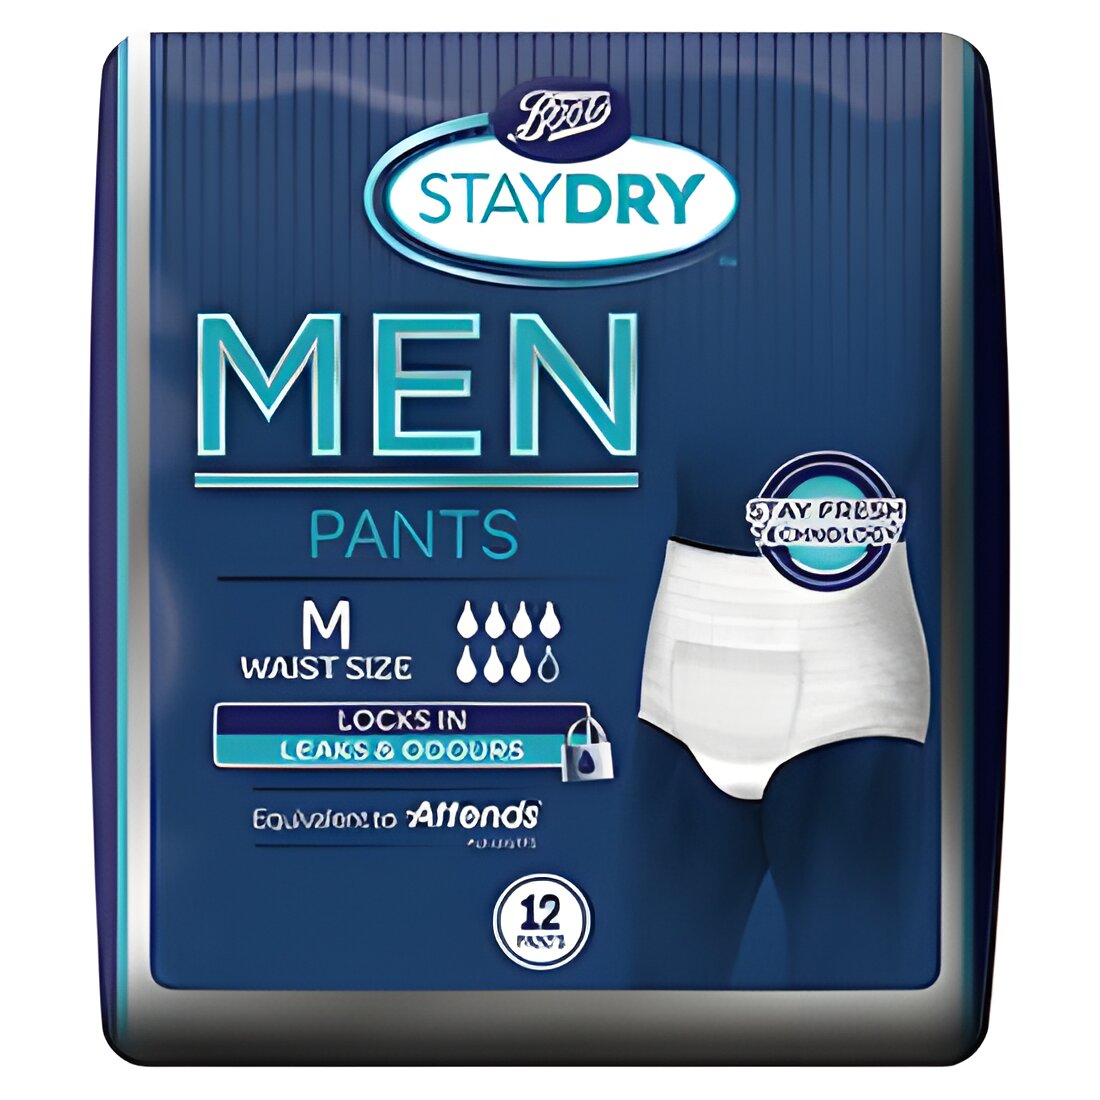 Free Boots Staydry Incontinence Samples